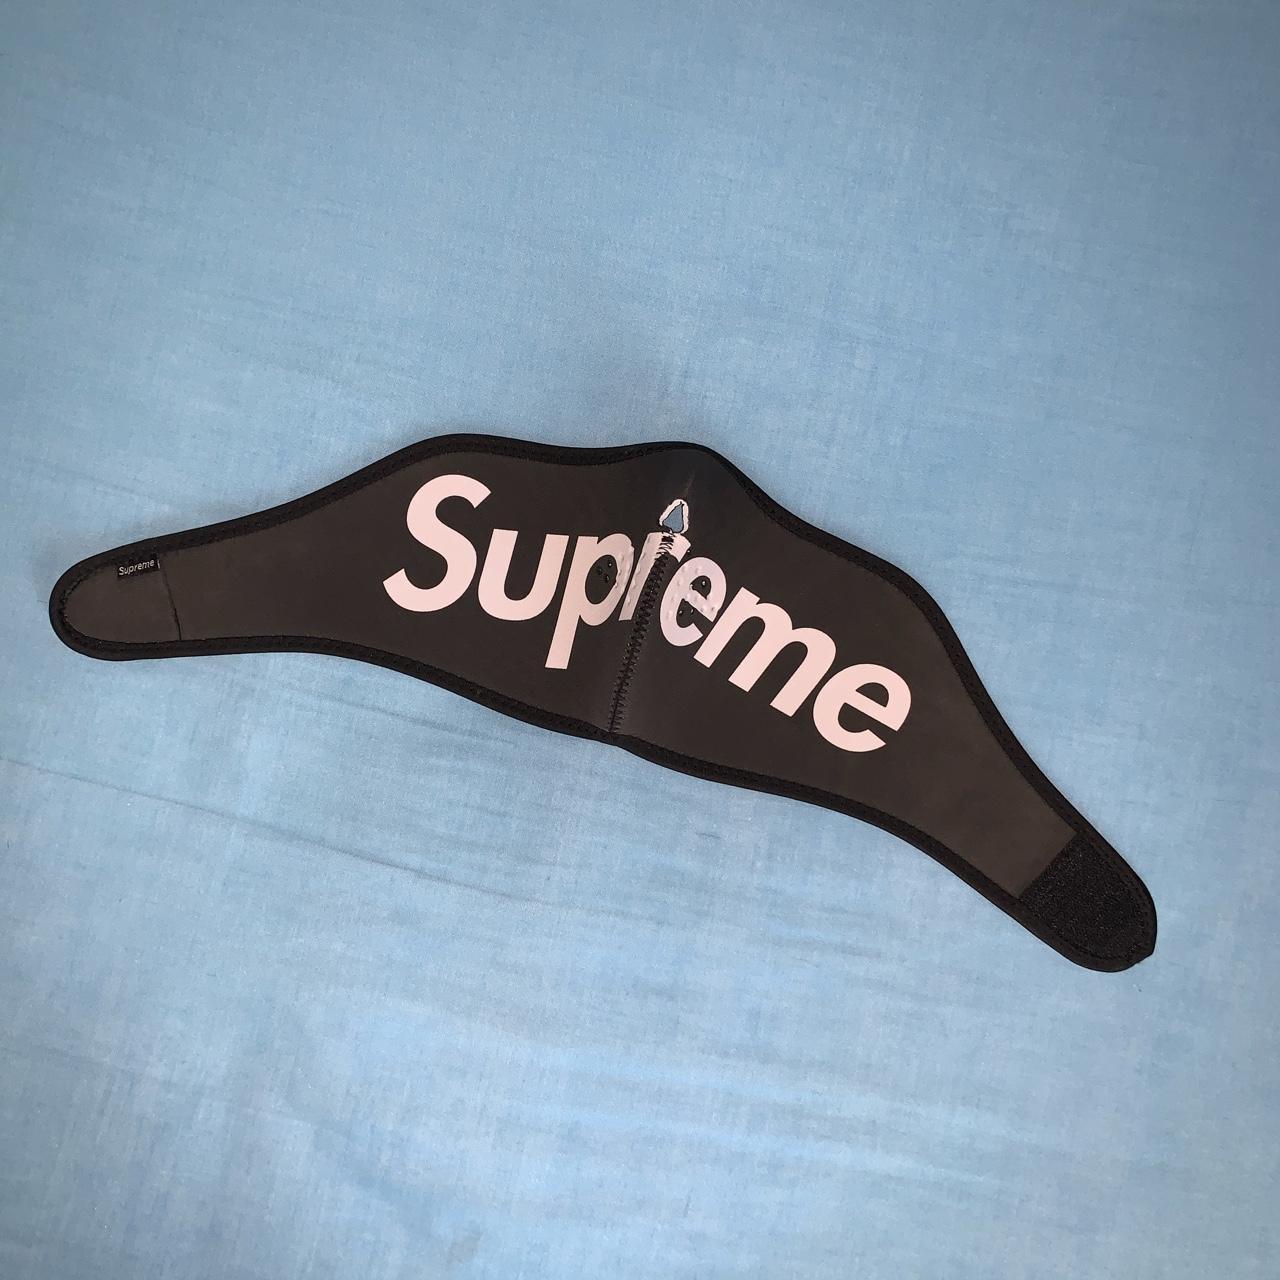 SUPREME FW14 FACE MASK BLACK🔥 Very rare piece 🤘 In... - Depop